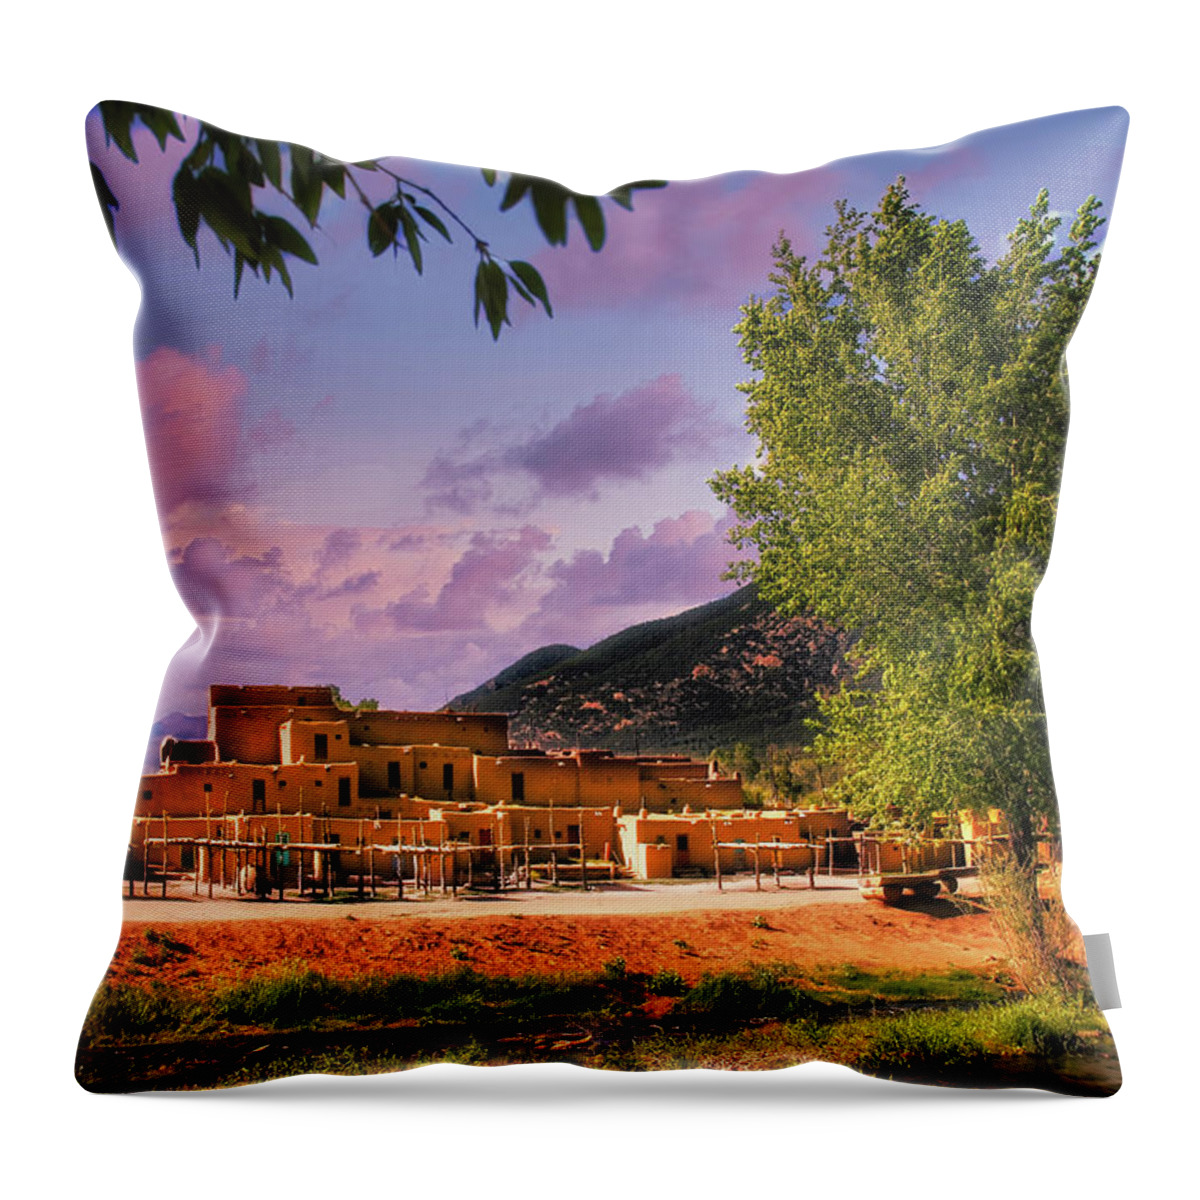 Landscapes Throw Pillow featuring the photograph Taos Pueblo by Micah Offman